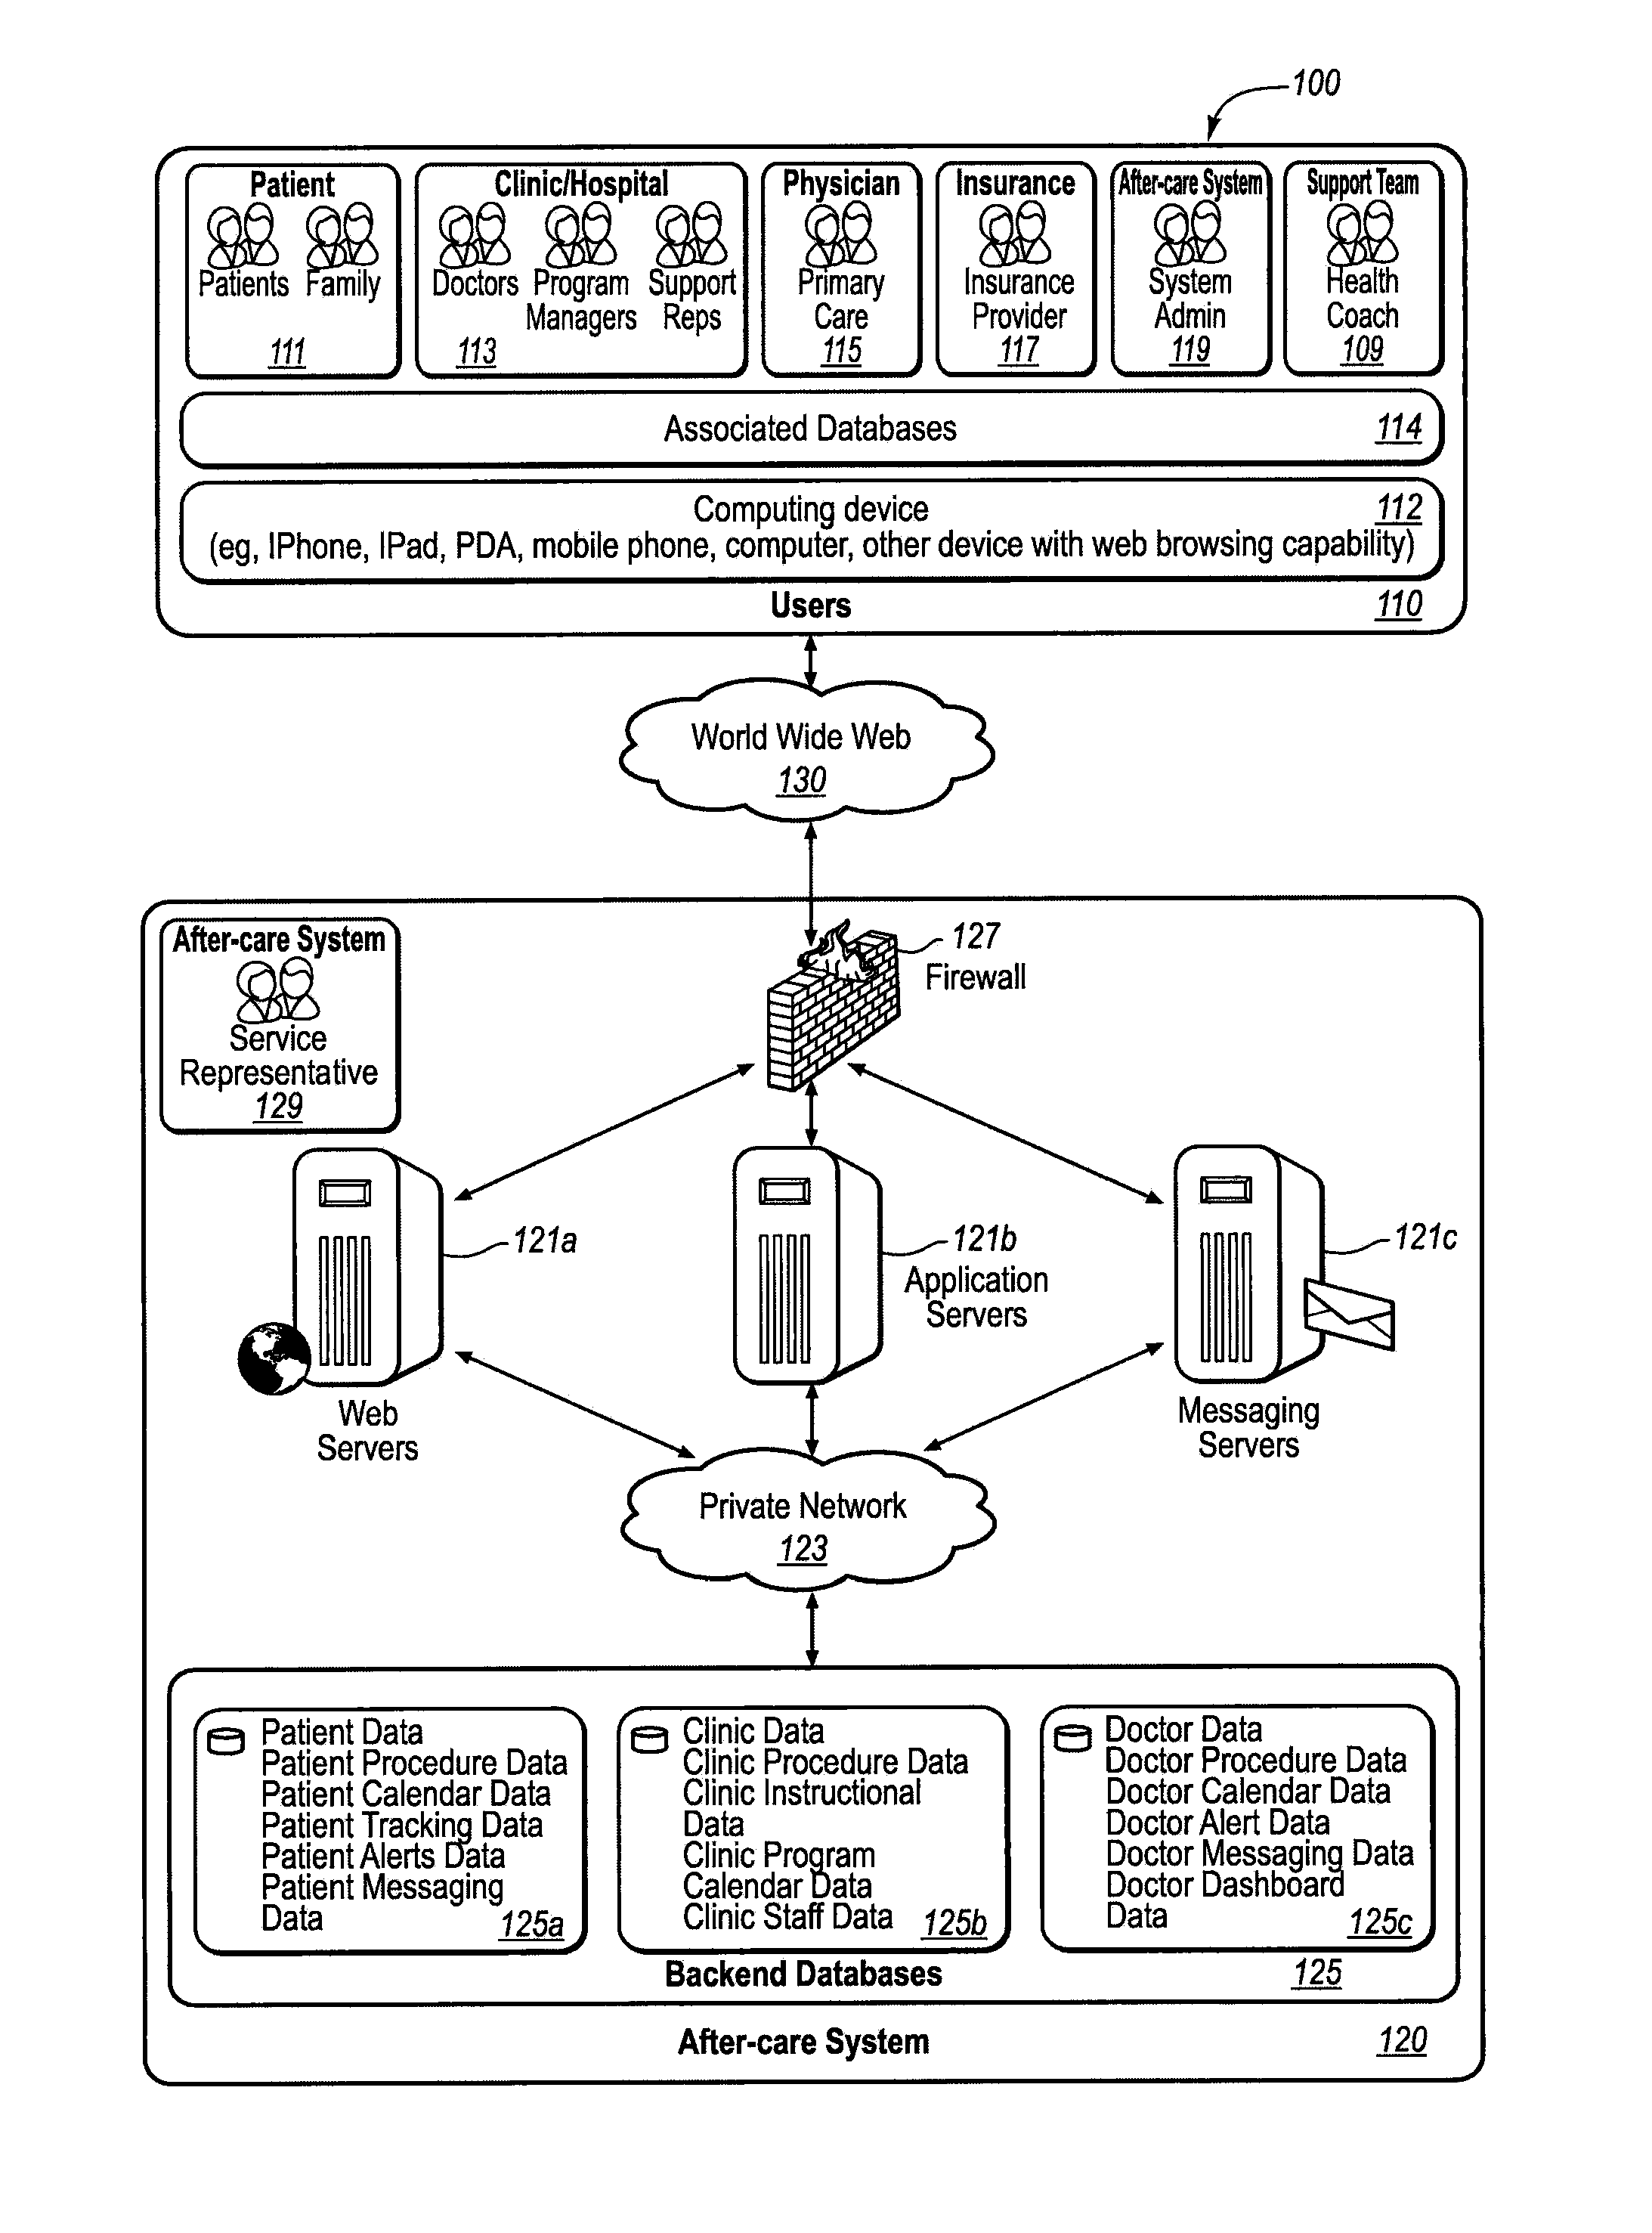 Systems and methods for managing at-home medical prevention, recovery, and maintenance